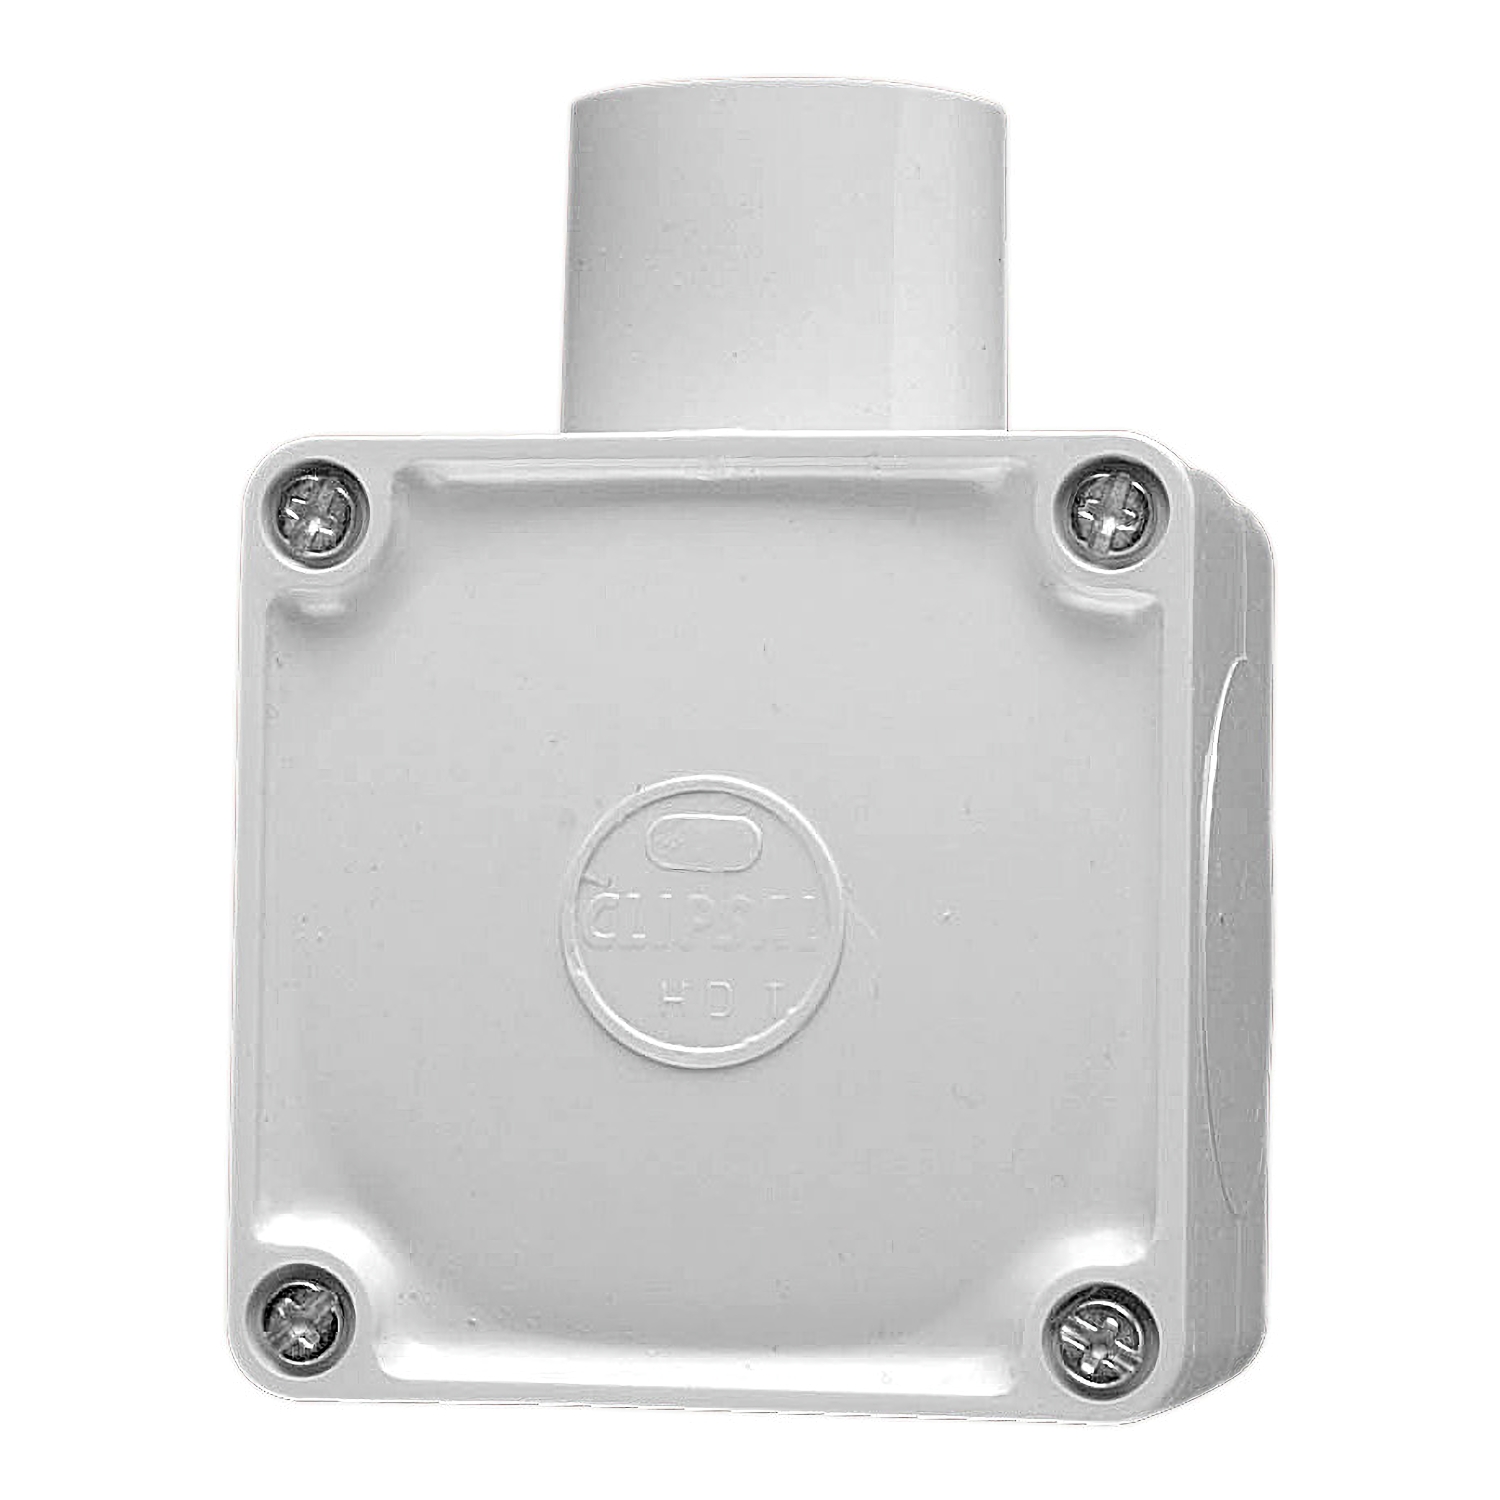 Square Junction Boxes, PVC, 40mm Entries, 1 Way, Grey